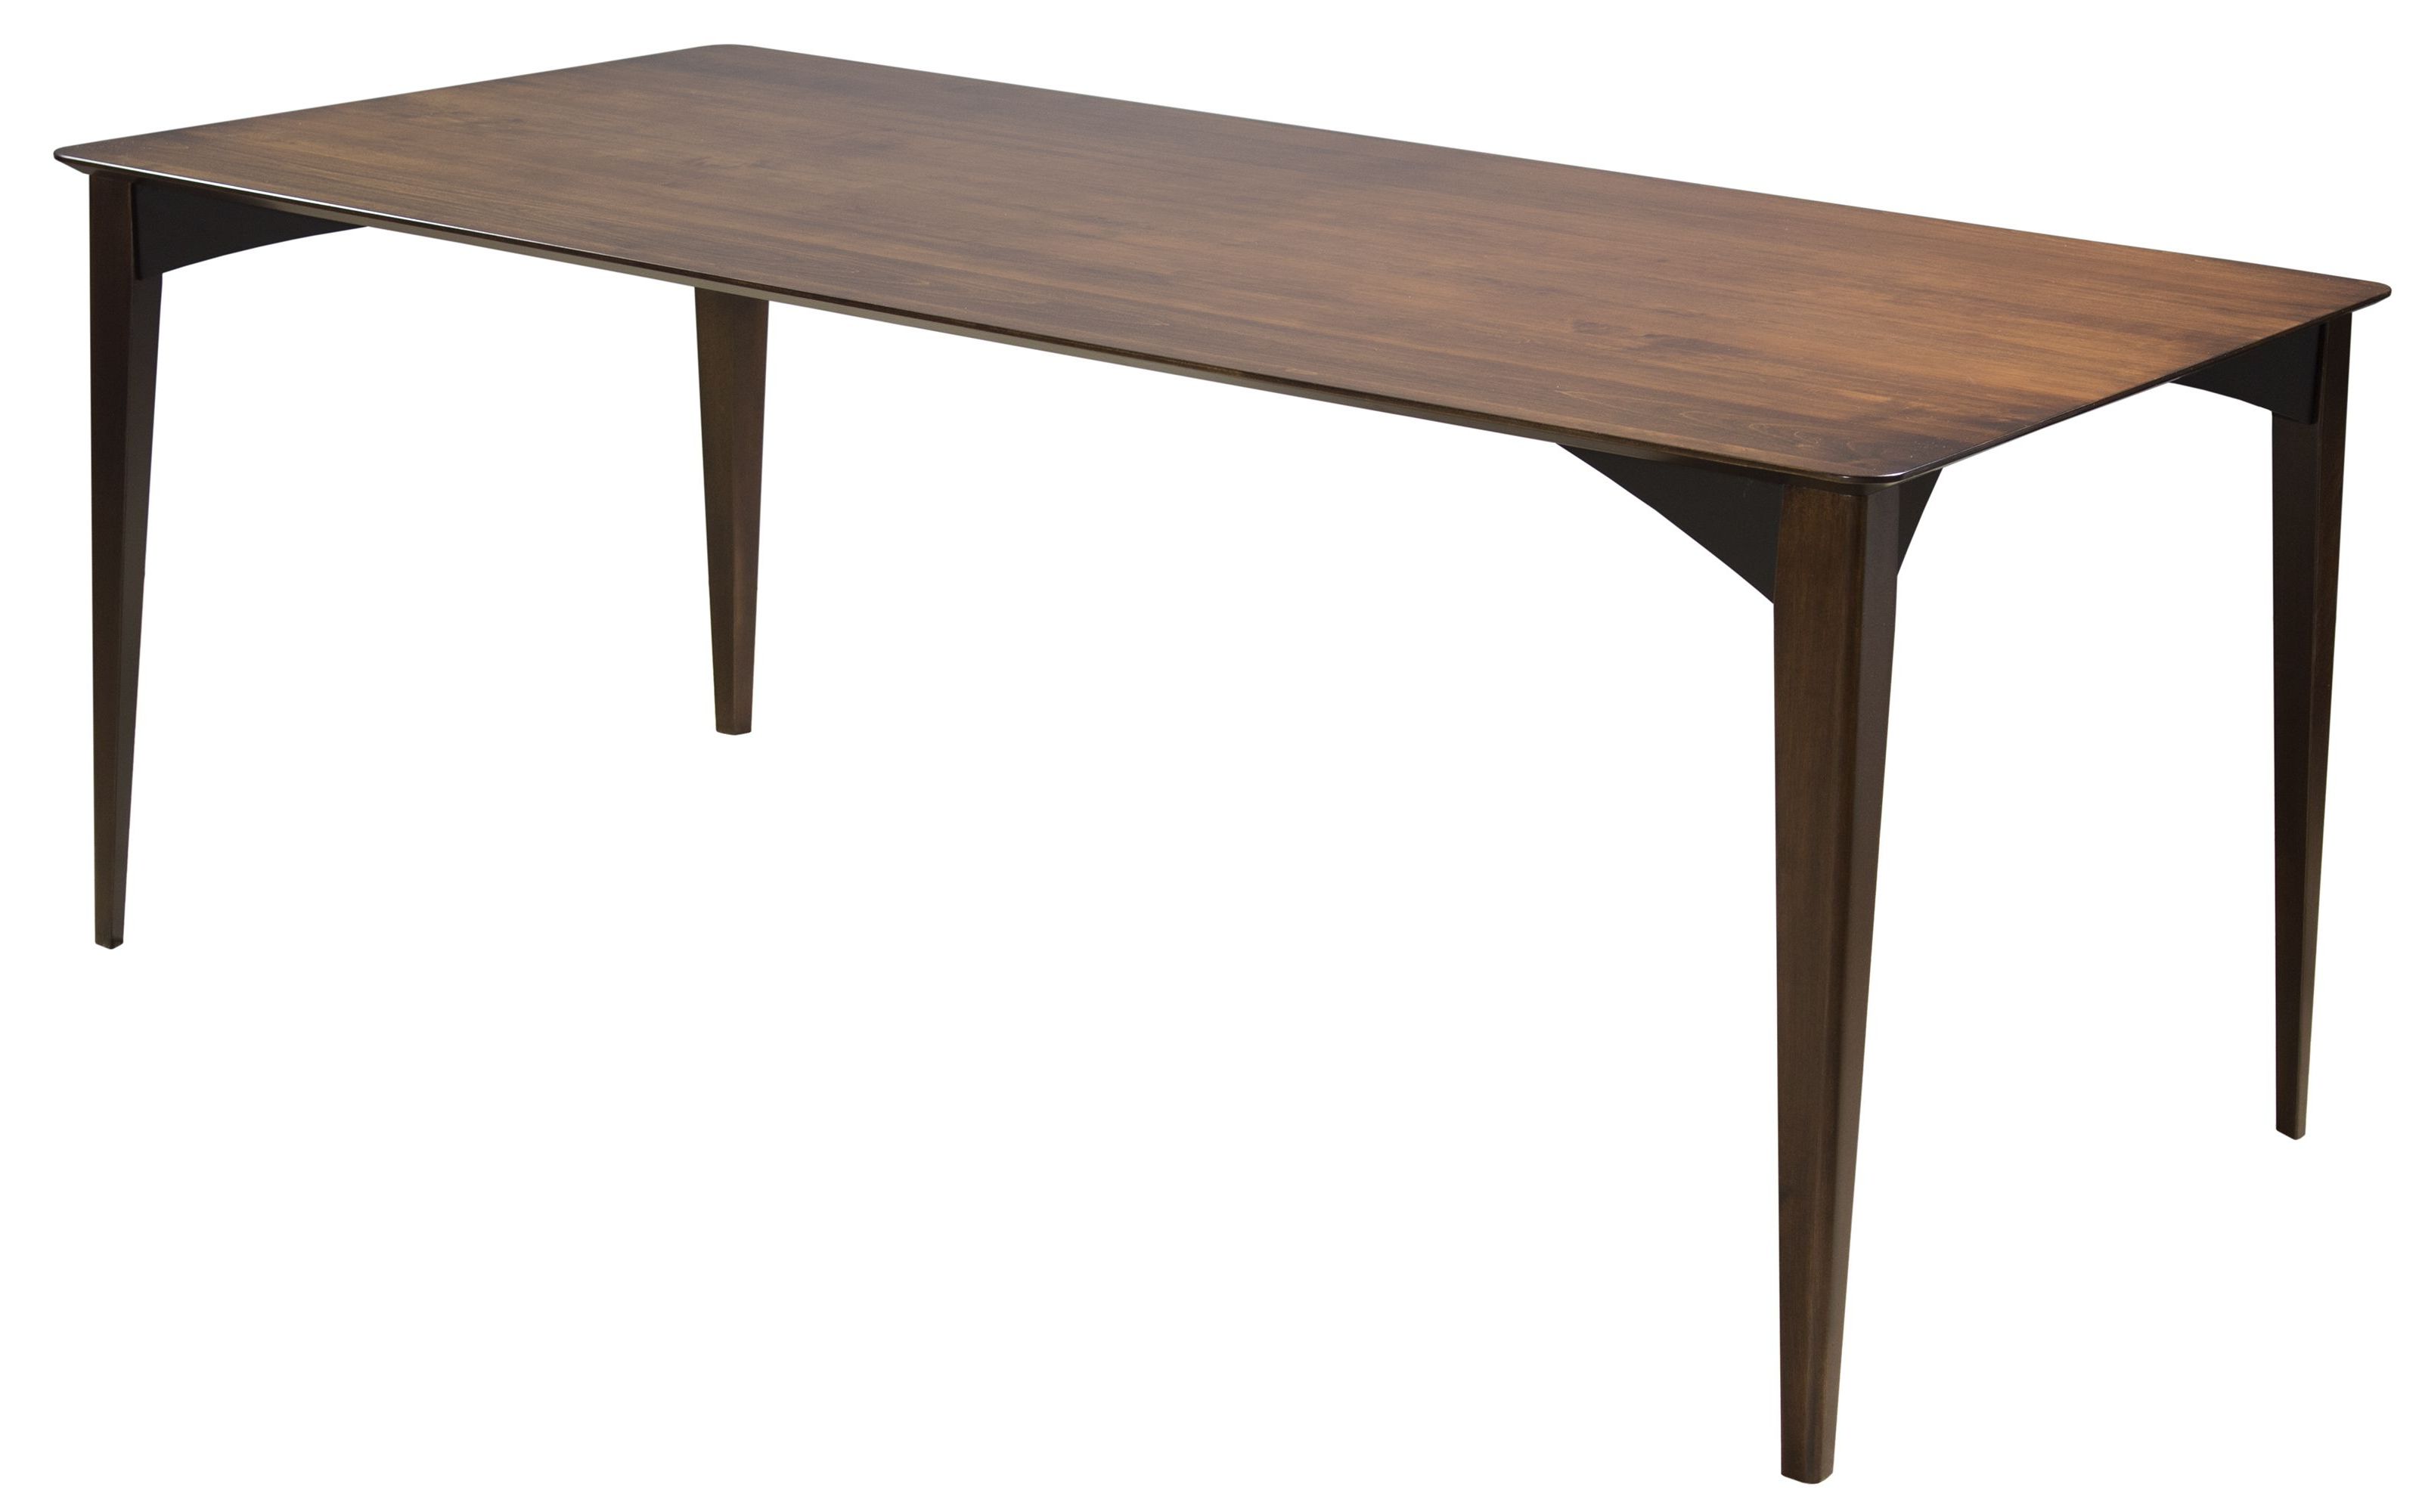 Remi Dining Table In Amaretto Finish From Saloom (View 9 of 20)